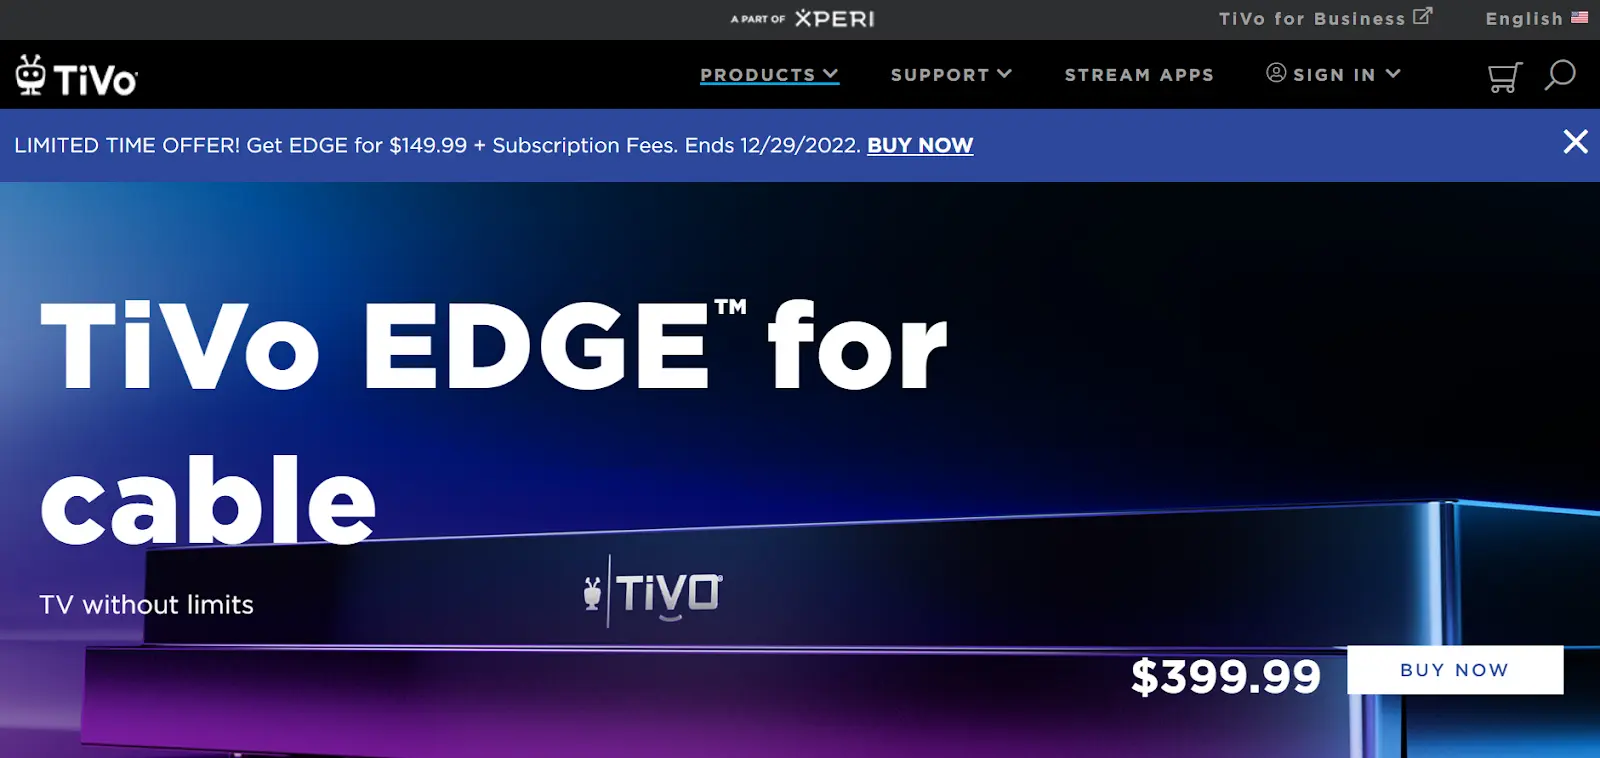 TiVo Edge for Cable